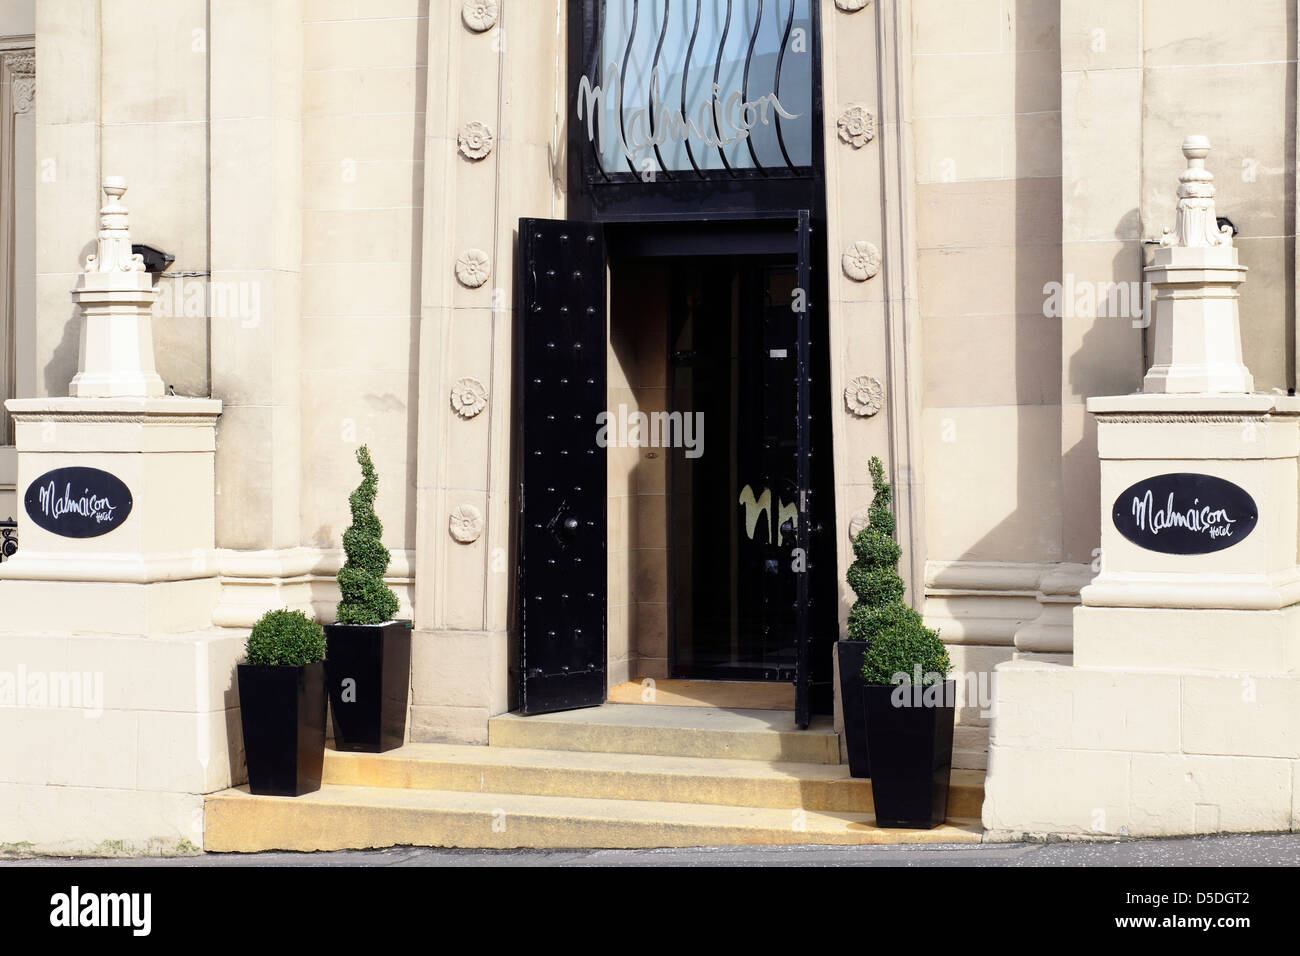 Malmaison Glasgow, entrance to the hotel on George Street in the city centre, Scotland, UK Stock Photo